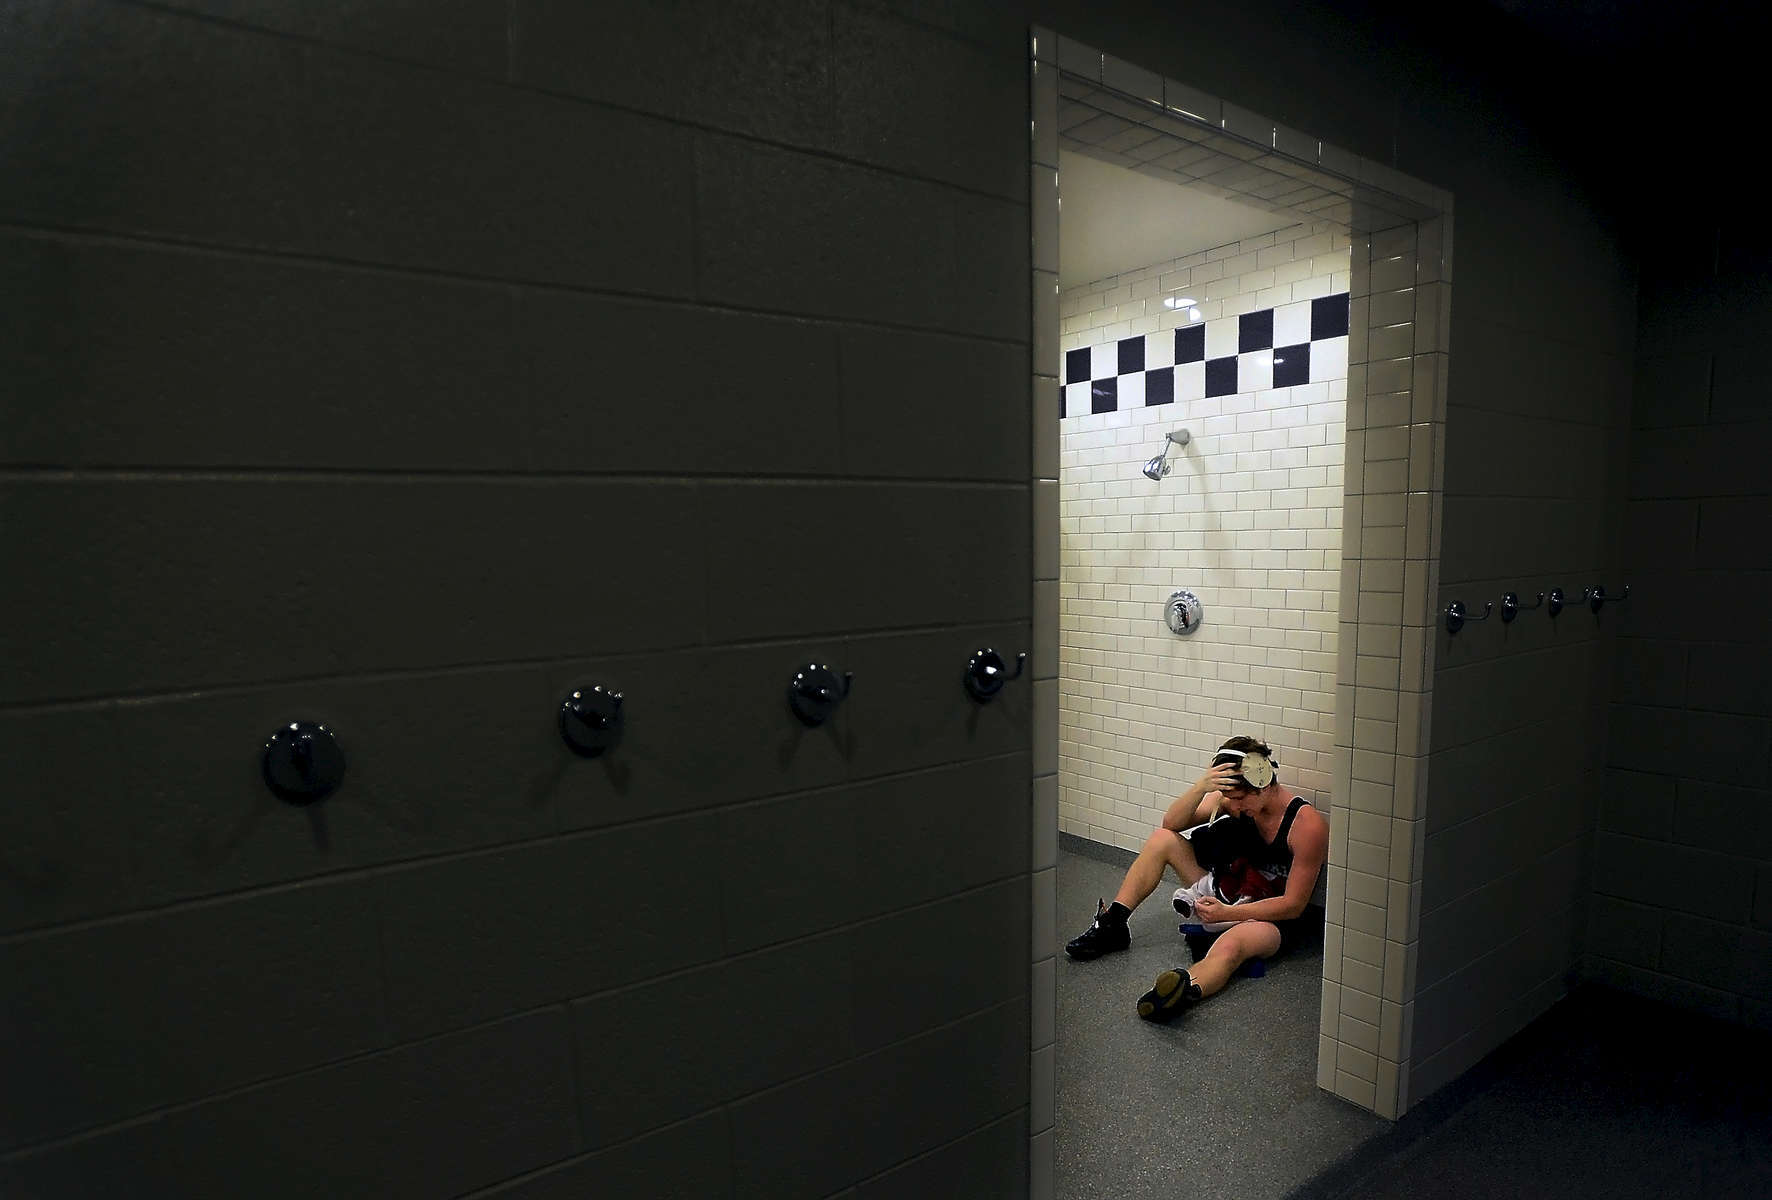 Arie Bekhtyar of Franklin High School spends time alone in the boys shower area after losing his match during the quarterfinals of the 44th annual Father Ryan Invitational Wrestling Tournament in Nashville, Tenn. (Mark Zaleski/ The Tennessean)